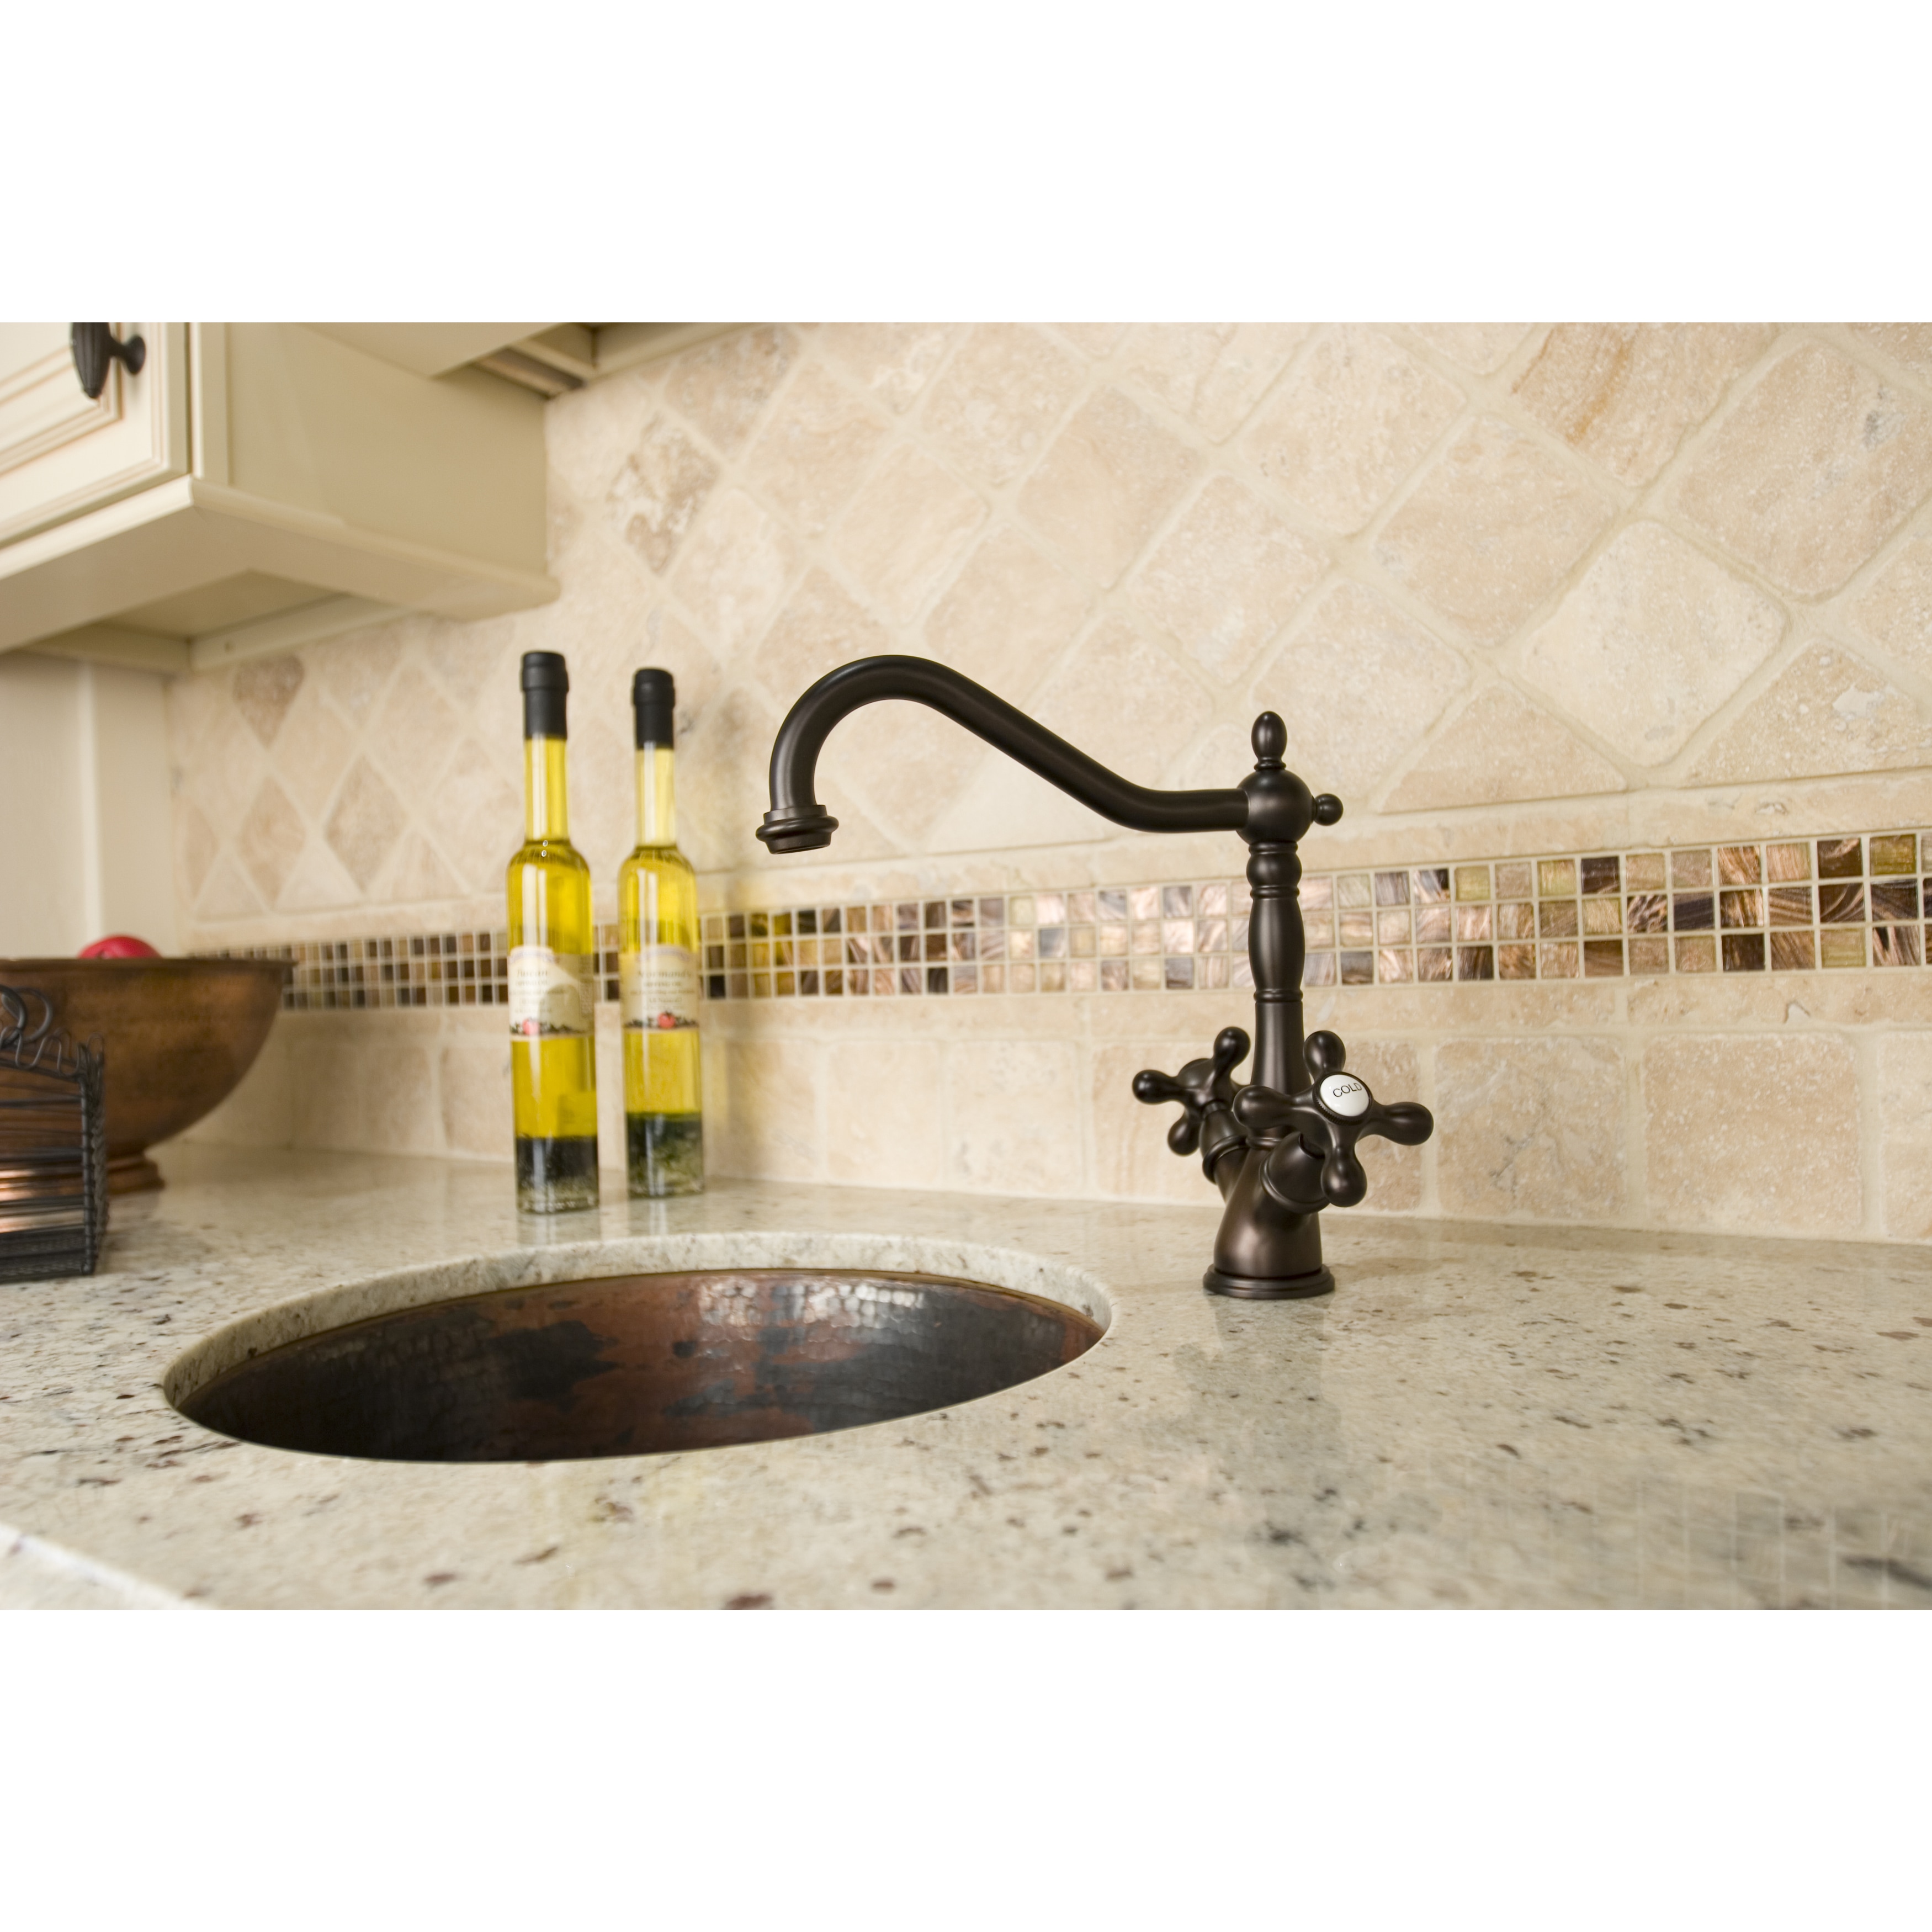 Oil Rubbed Bronze Kitchen Faucet Overstock 2332790